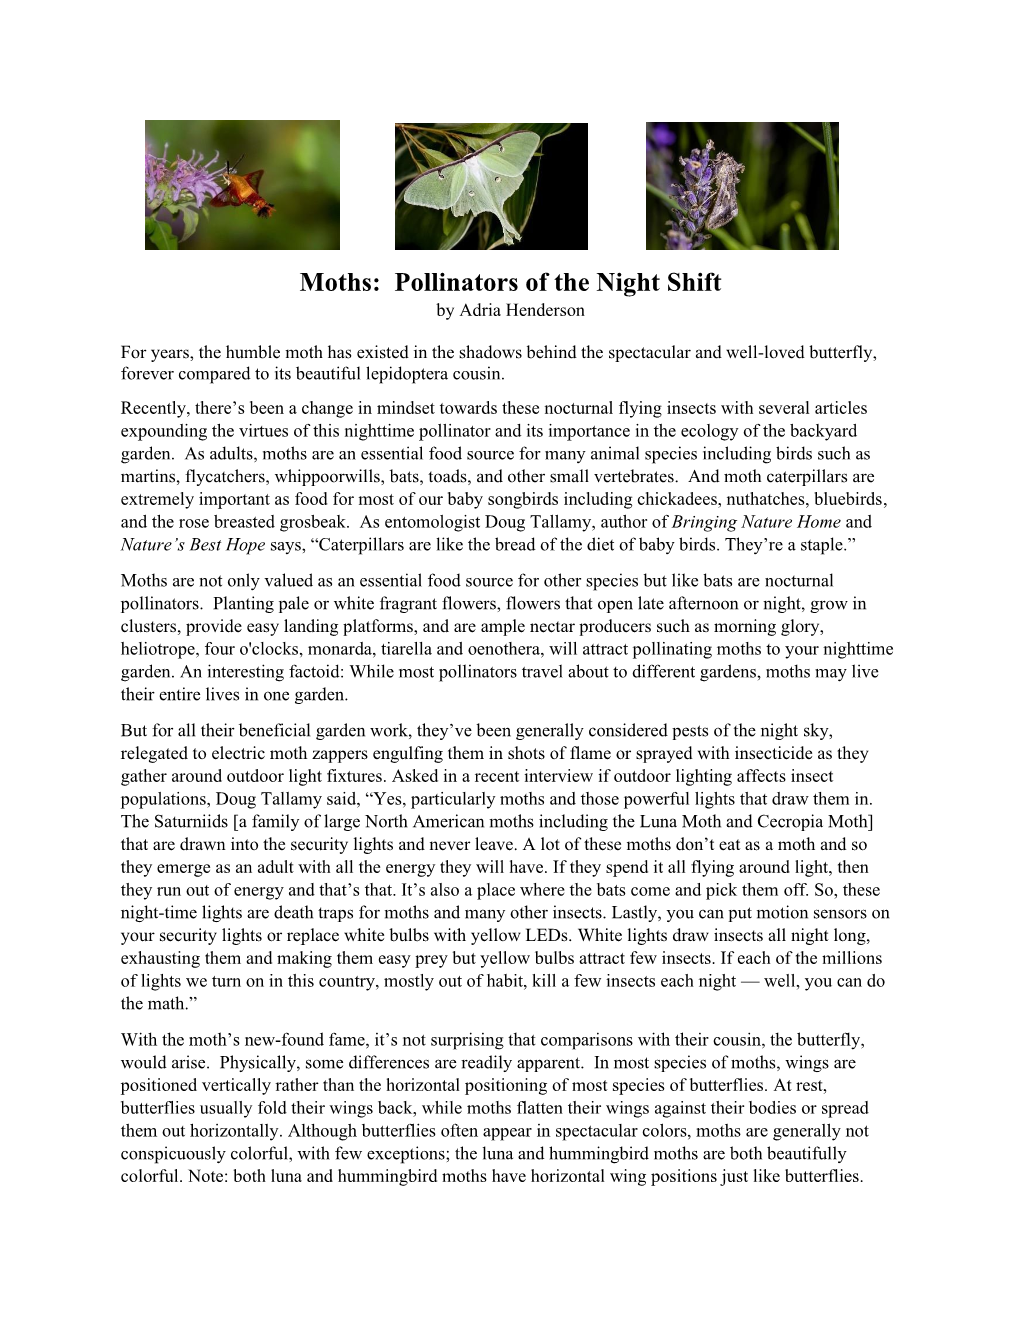 Moths: Pollinators of the Night Shift by Adria Henderson